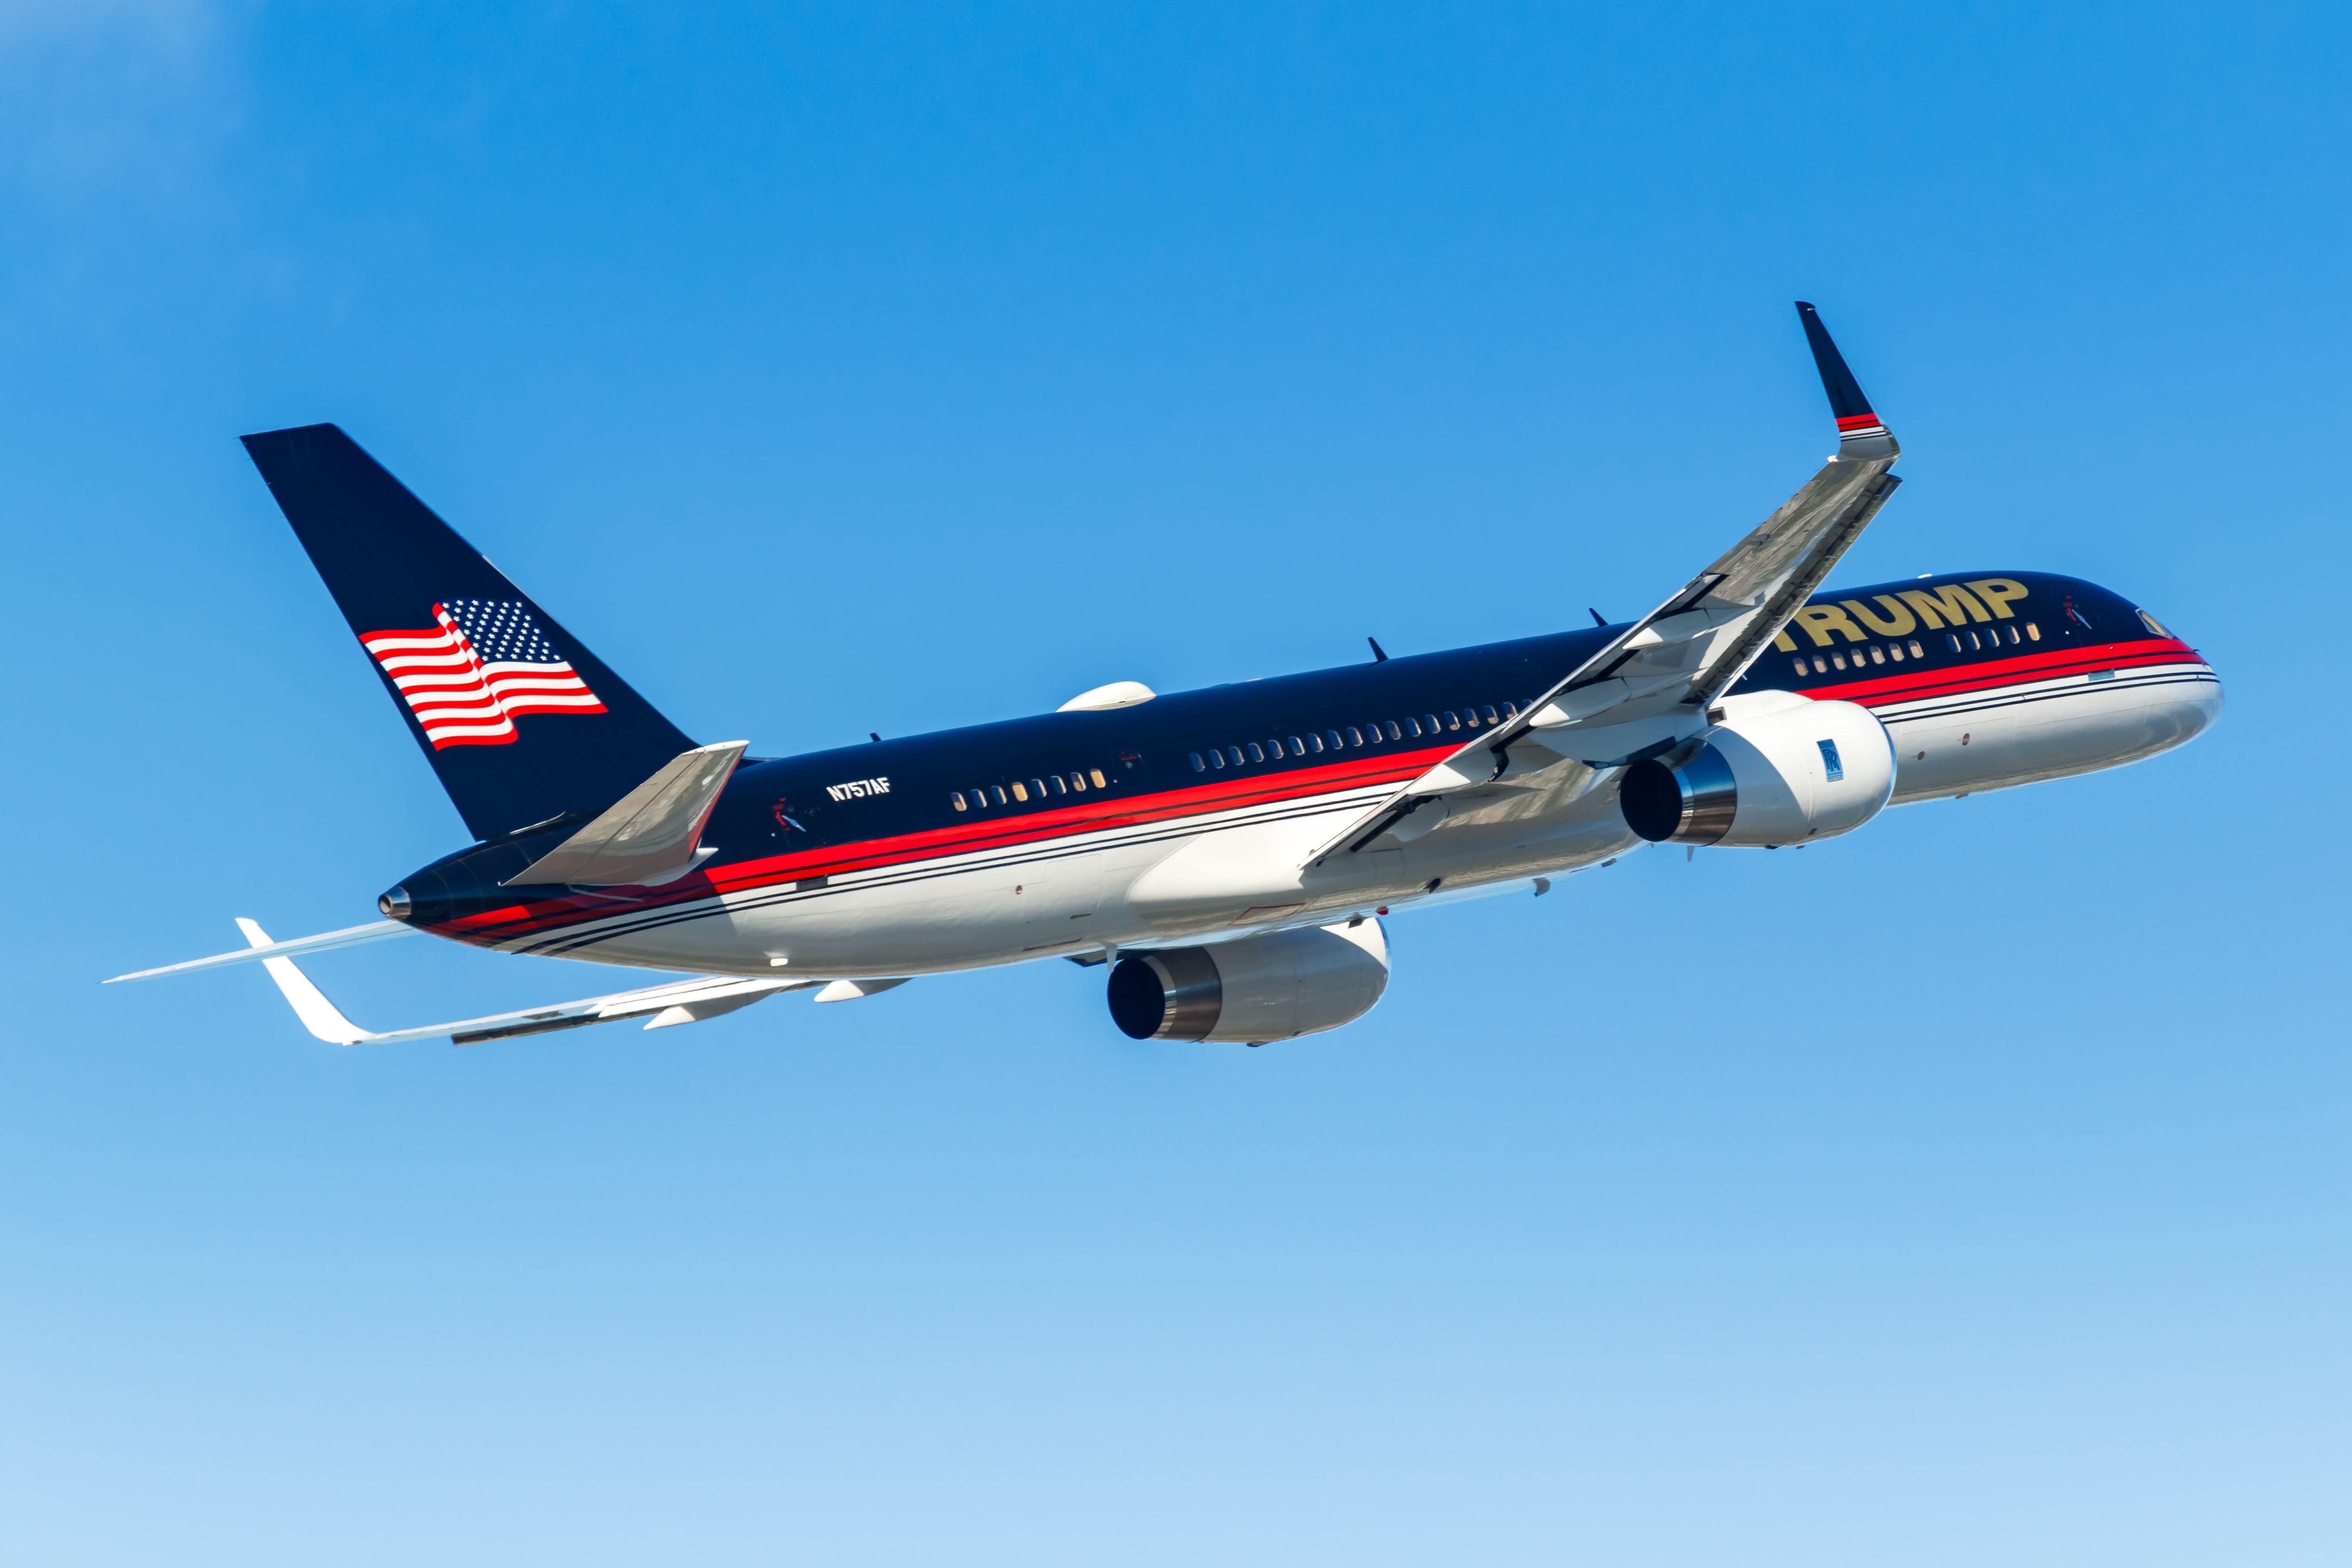 Donald Trump's Boeing 757 flying in the sky.